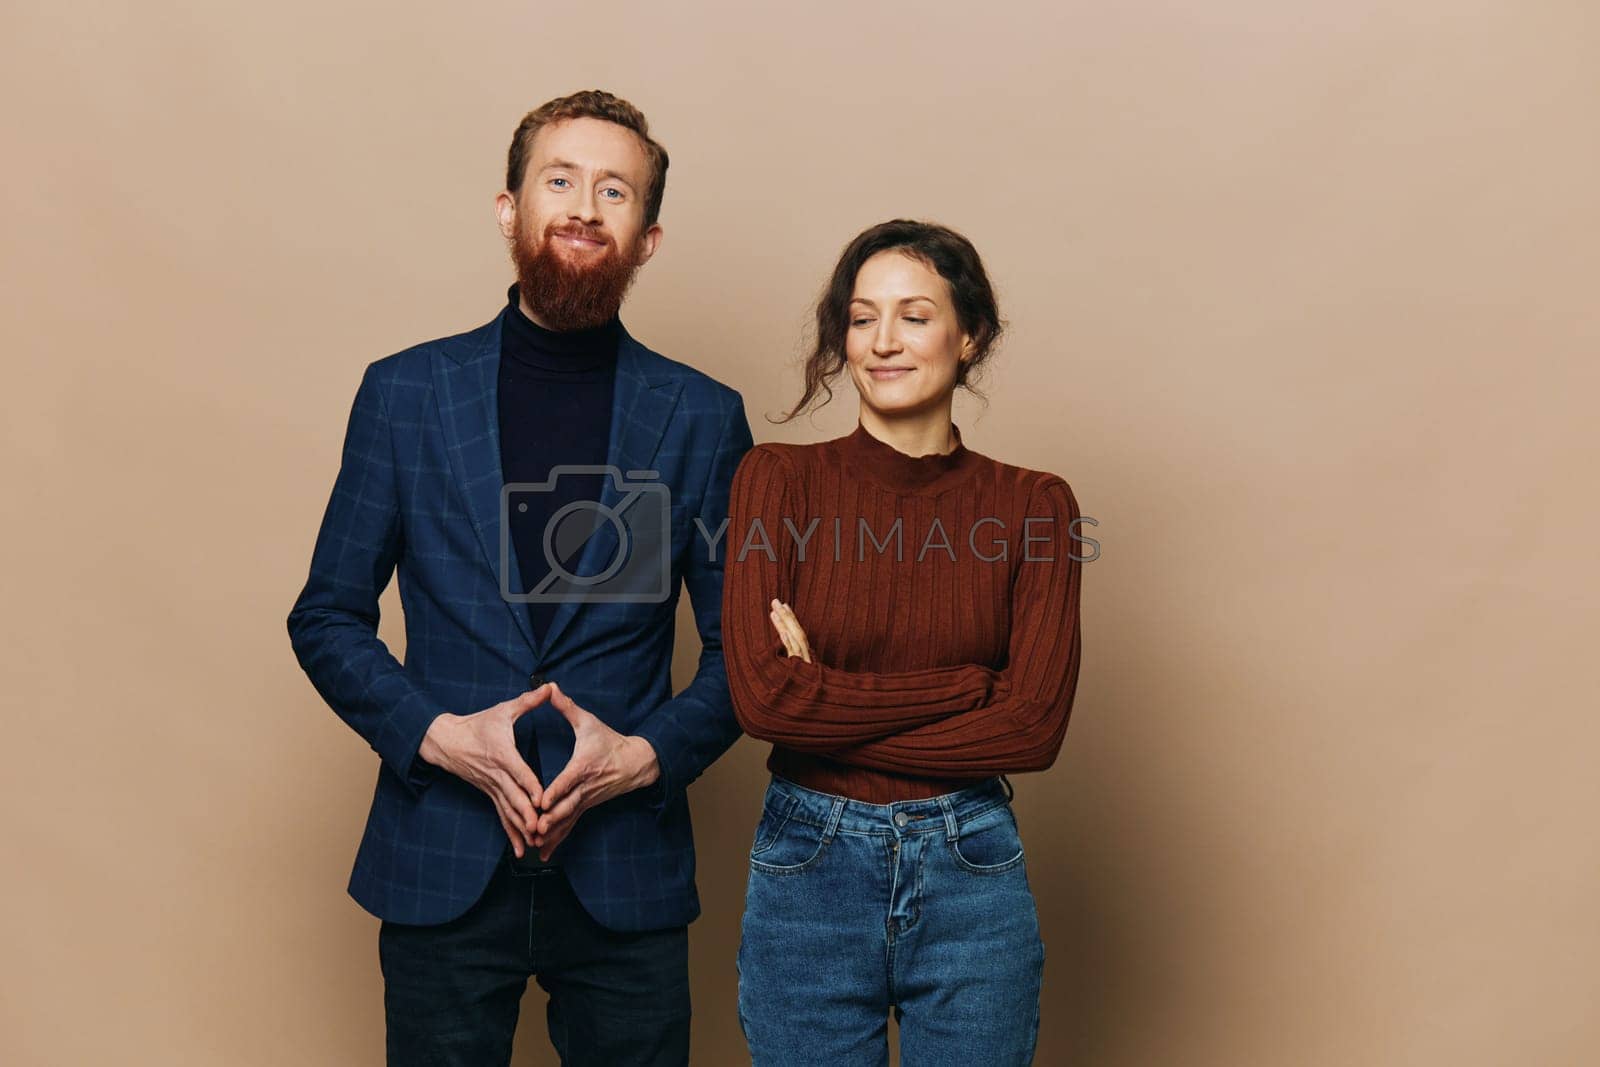 Royalty free image of Man and woman couple in a relationship smile and interaction on a beige background in a real relationship between people by SHOTPRIME